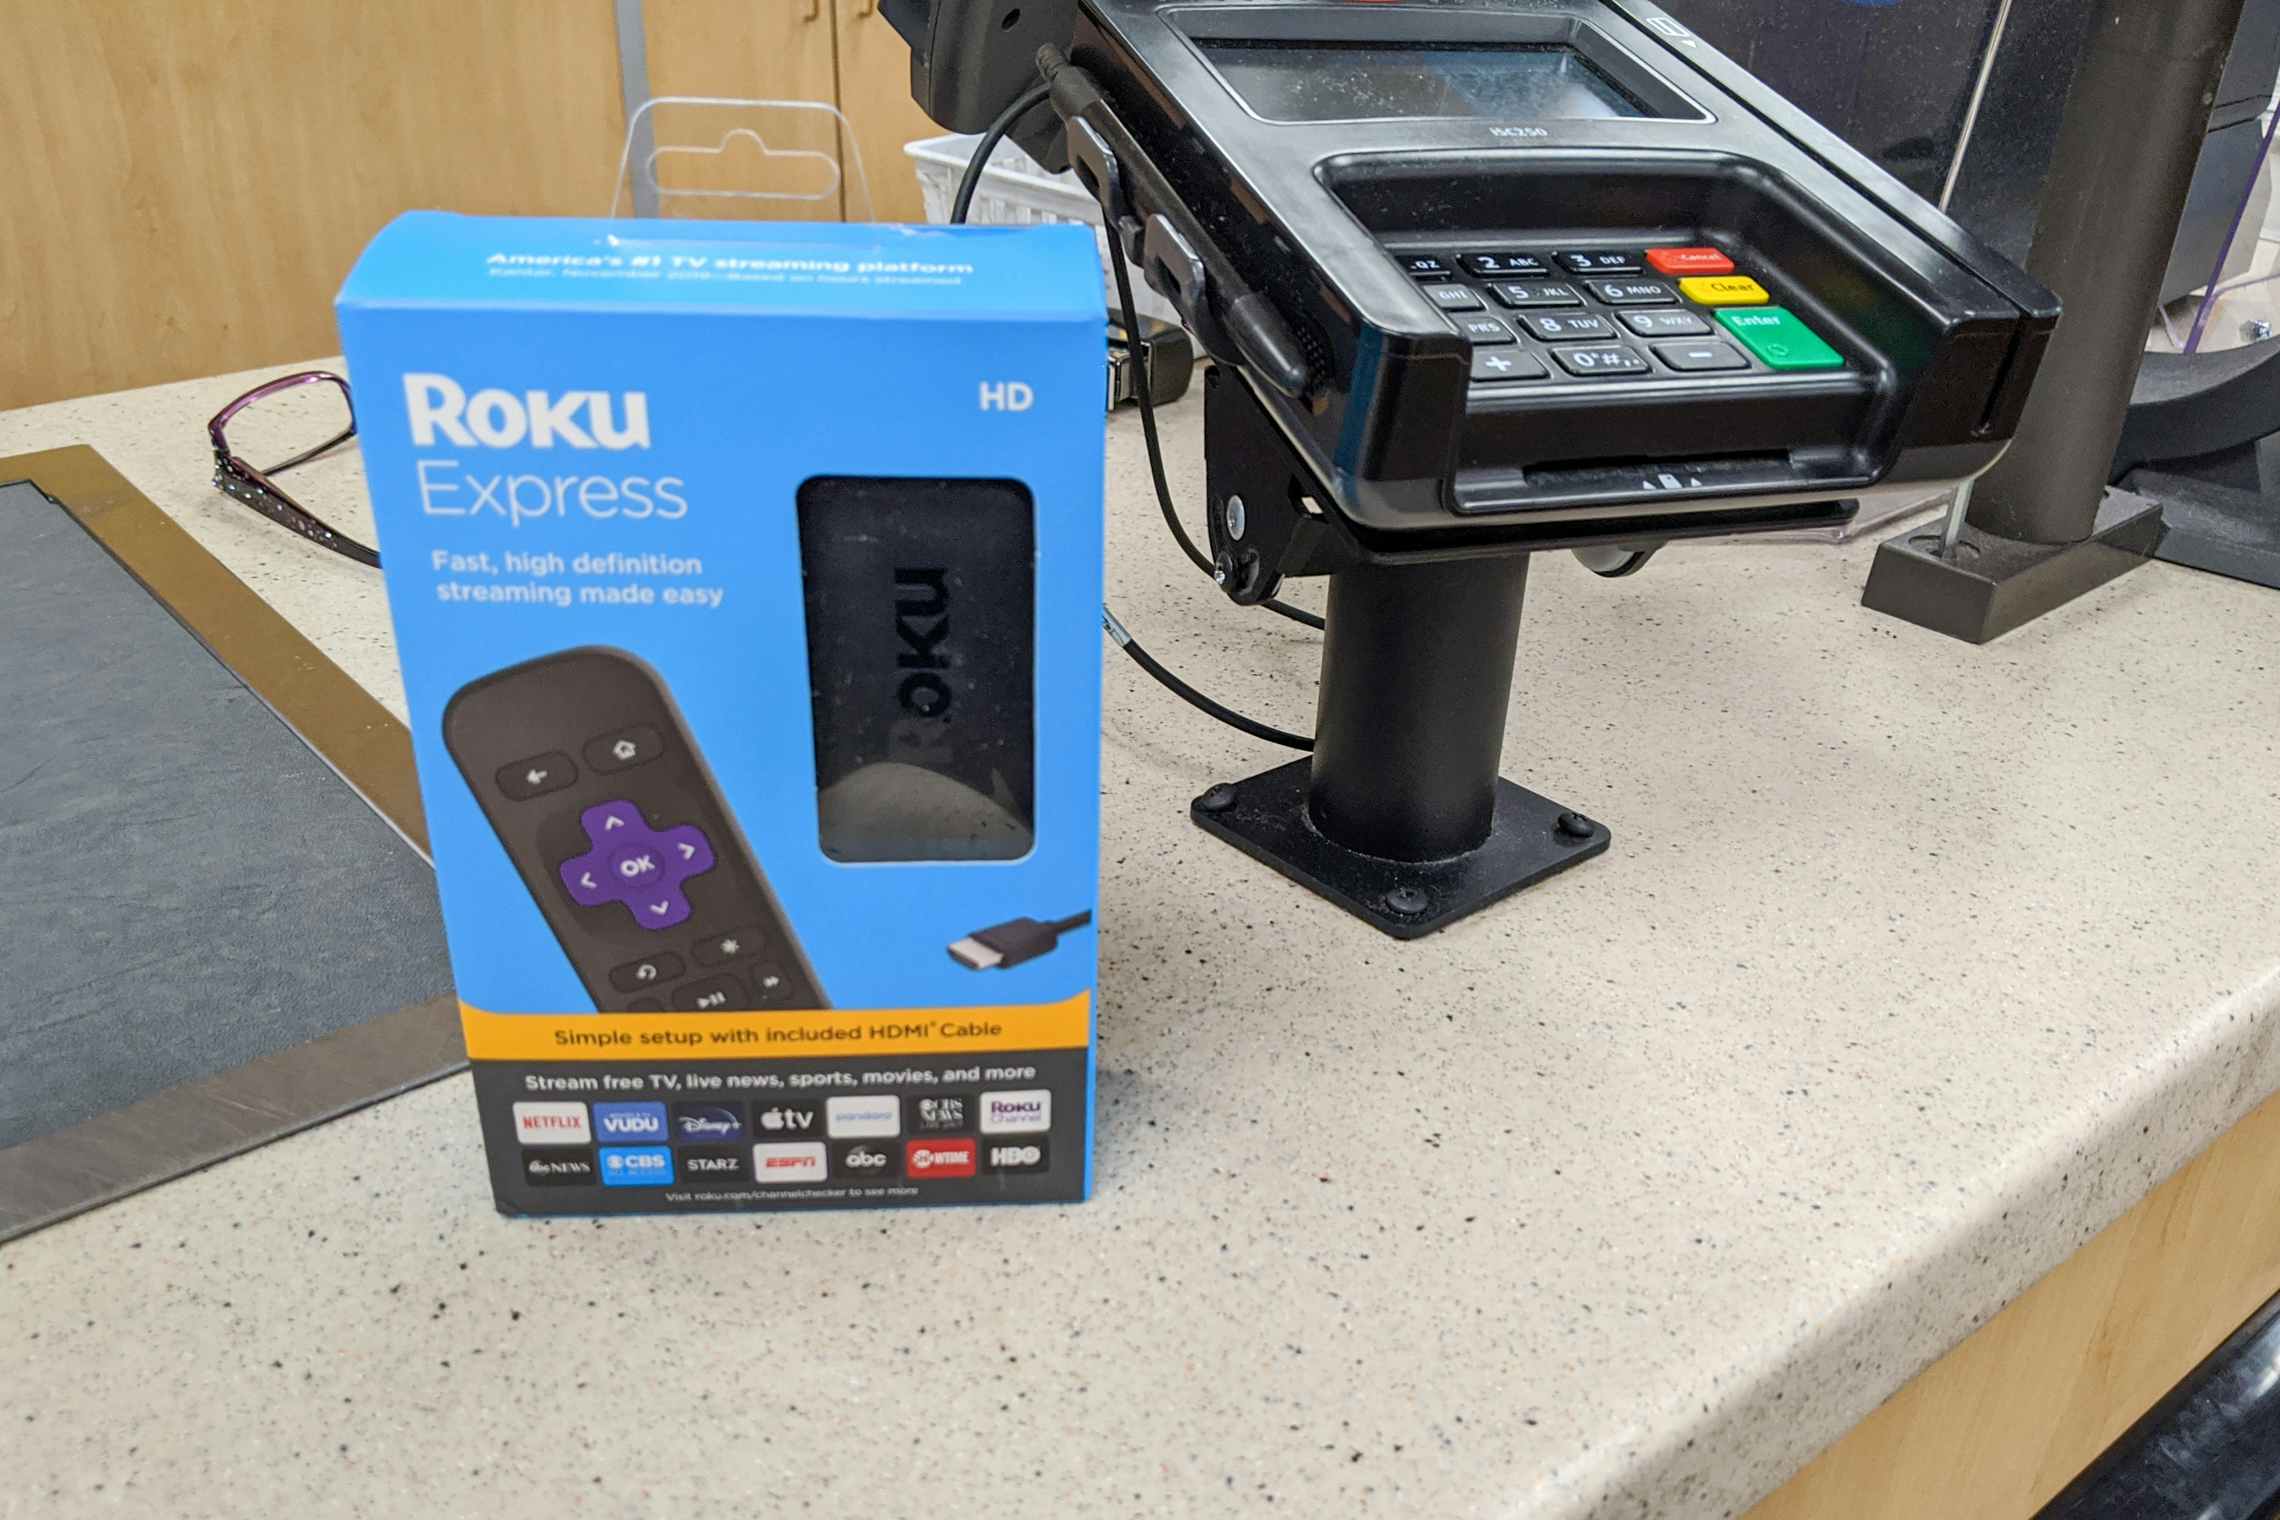 A roku sitting on the return counter at Walmart